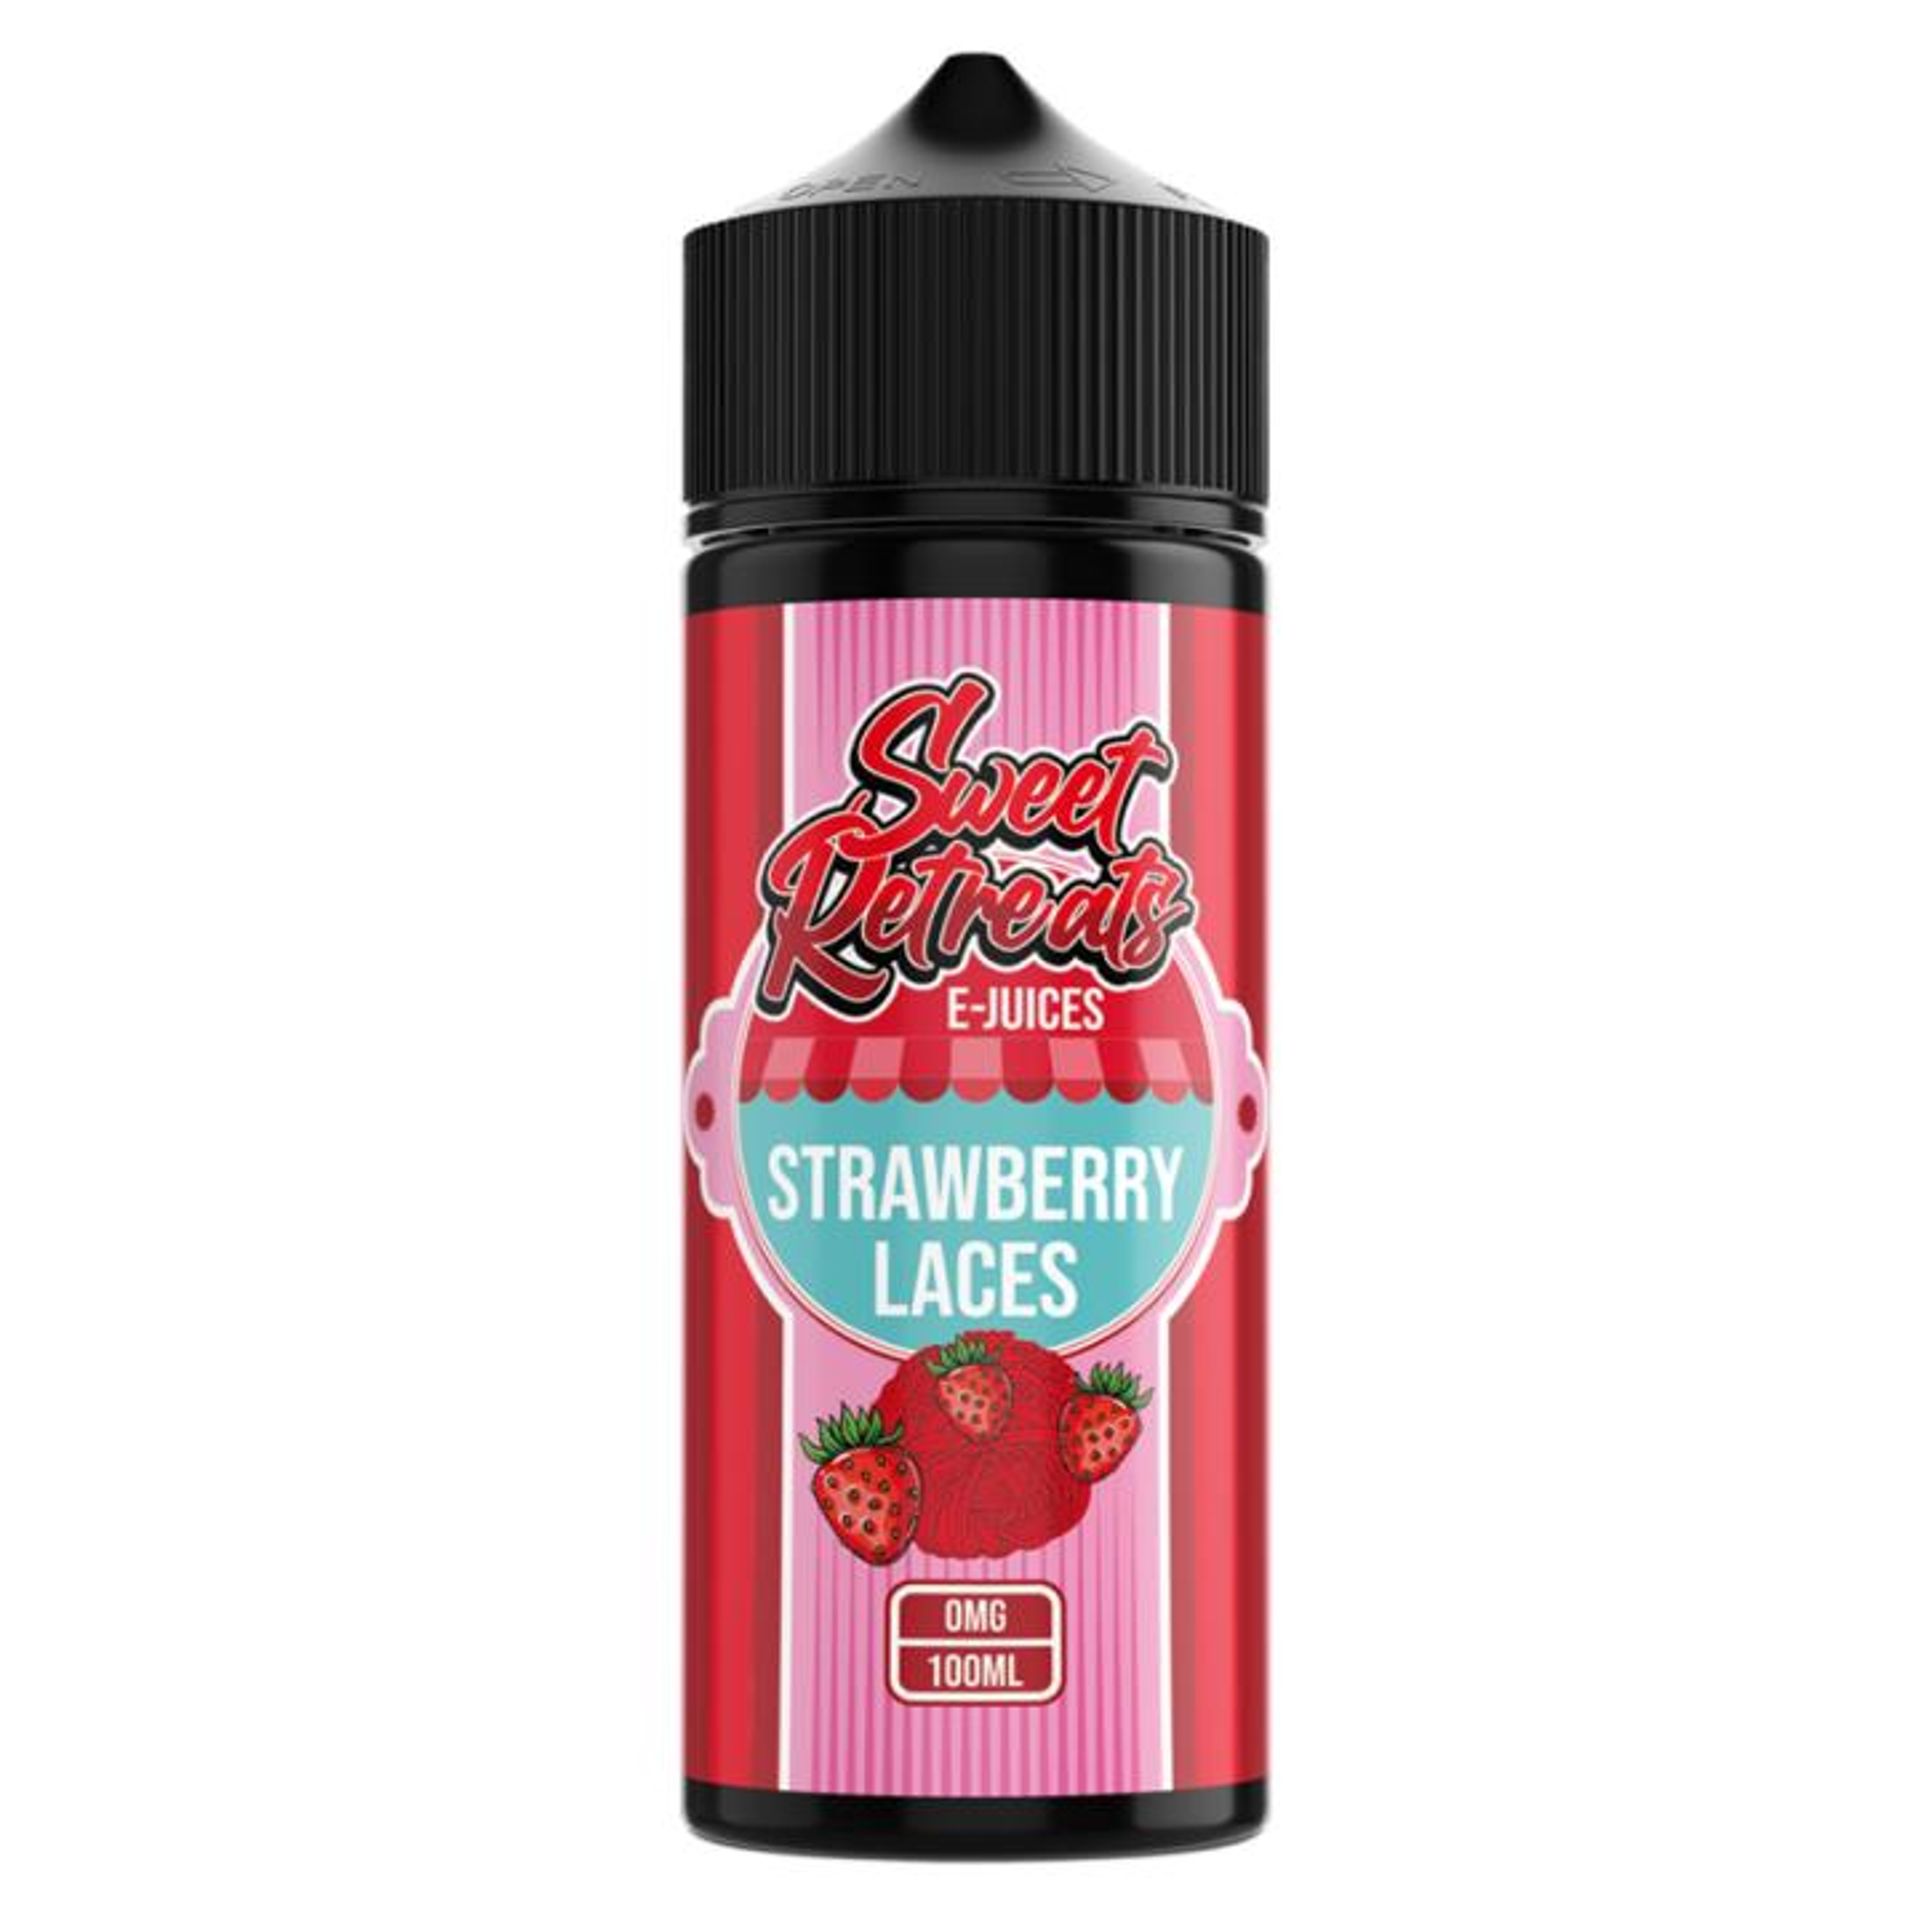 Image of Strawberry Laces by Sweet Retreat